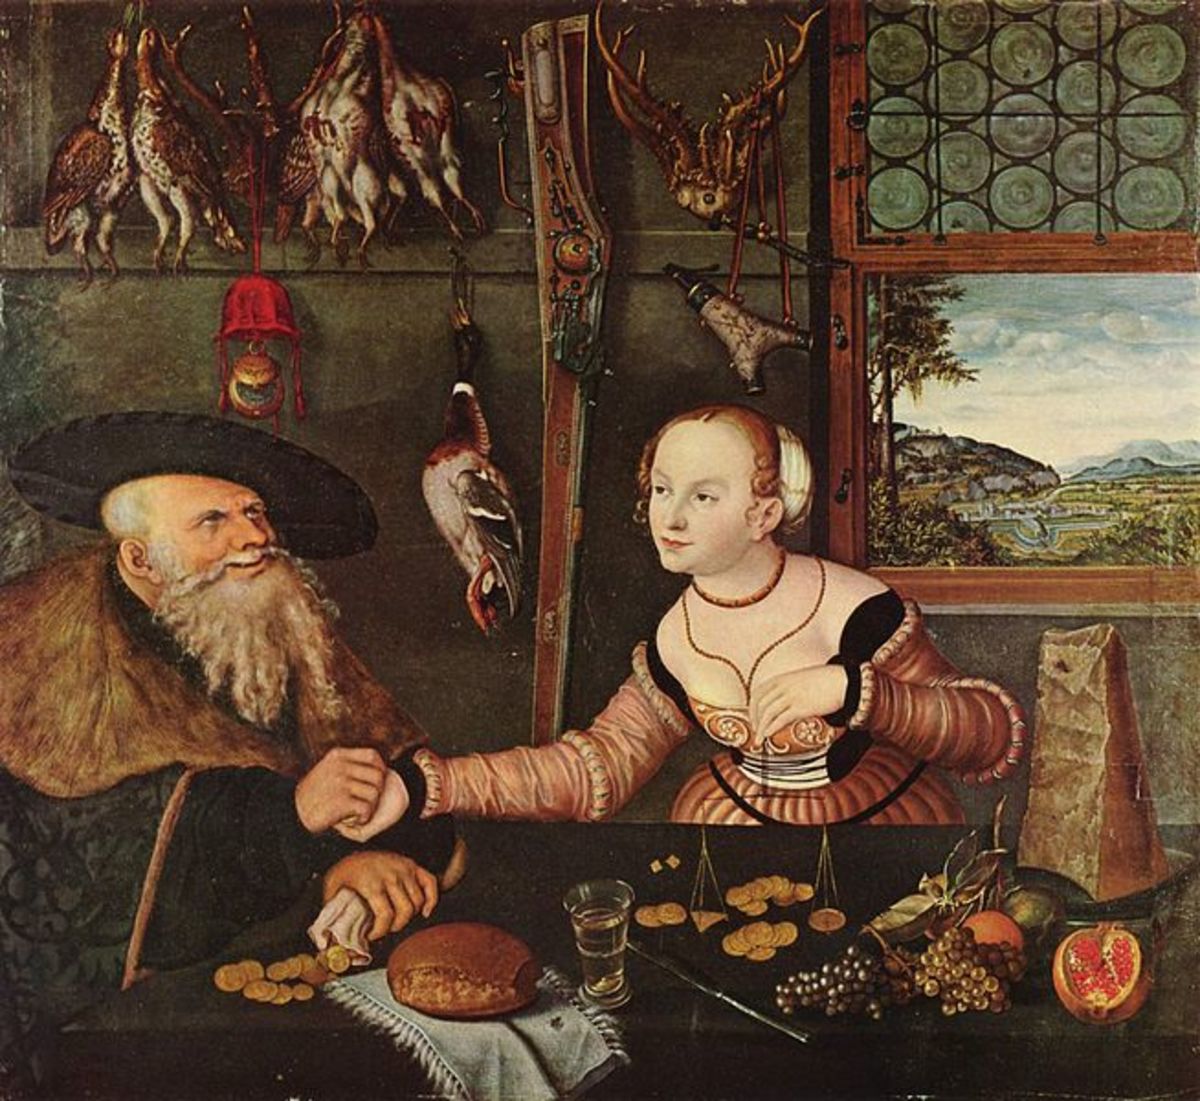 "The Ill-matched Couple" by Lucas Cranach the Elder. 1532